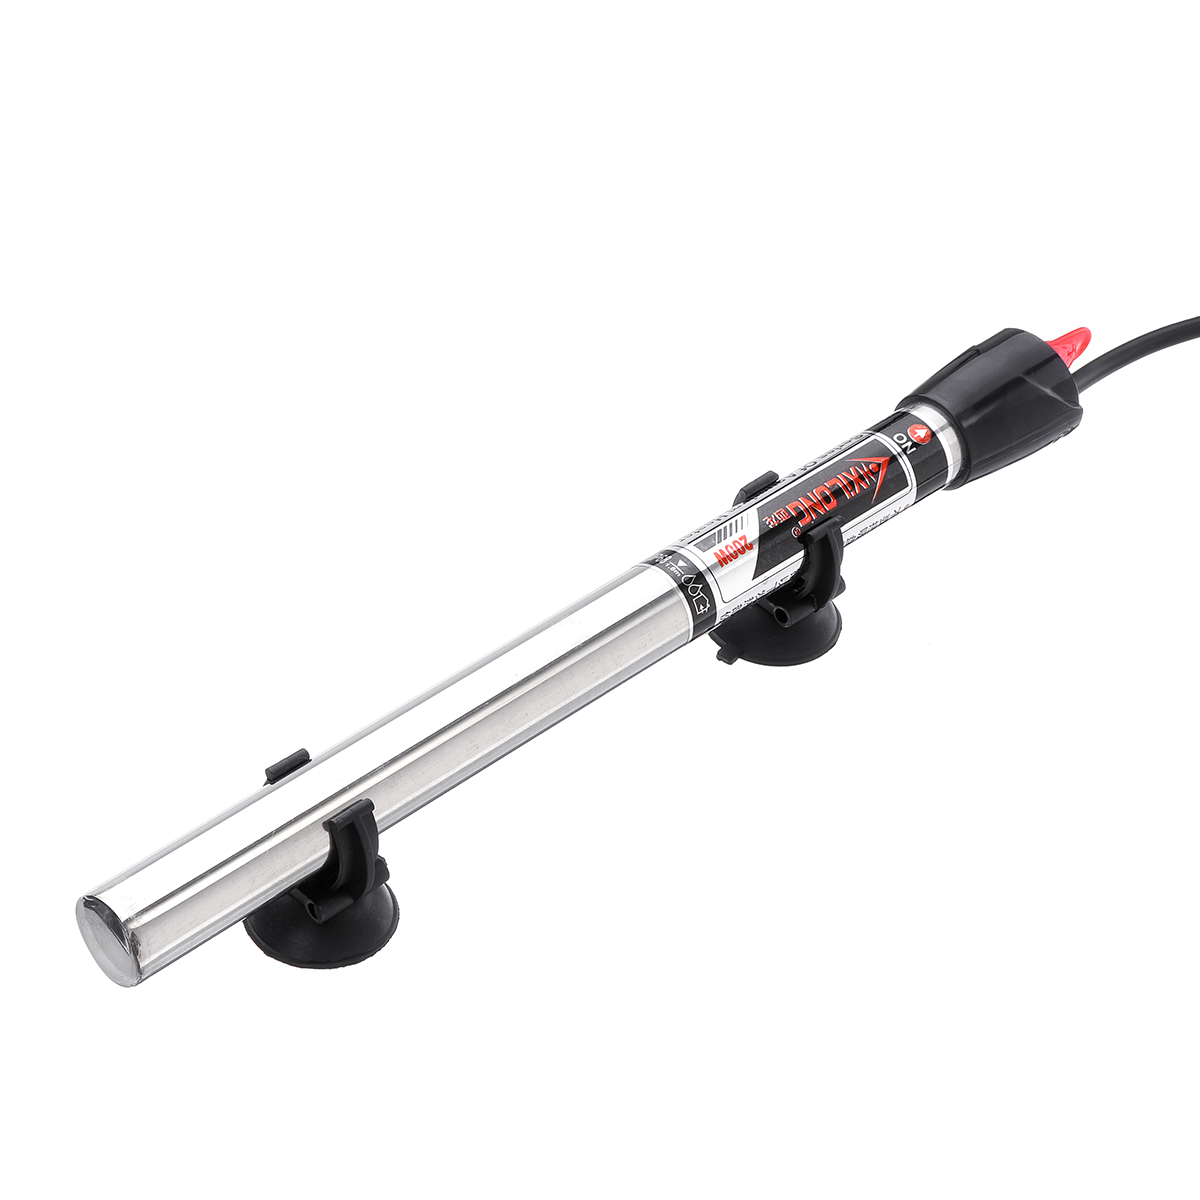 100W200W-Submersible-Stainless-Steel-Water-Heater-Rod-Aquarium-Fish-Tank-220V-1478945-6